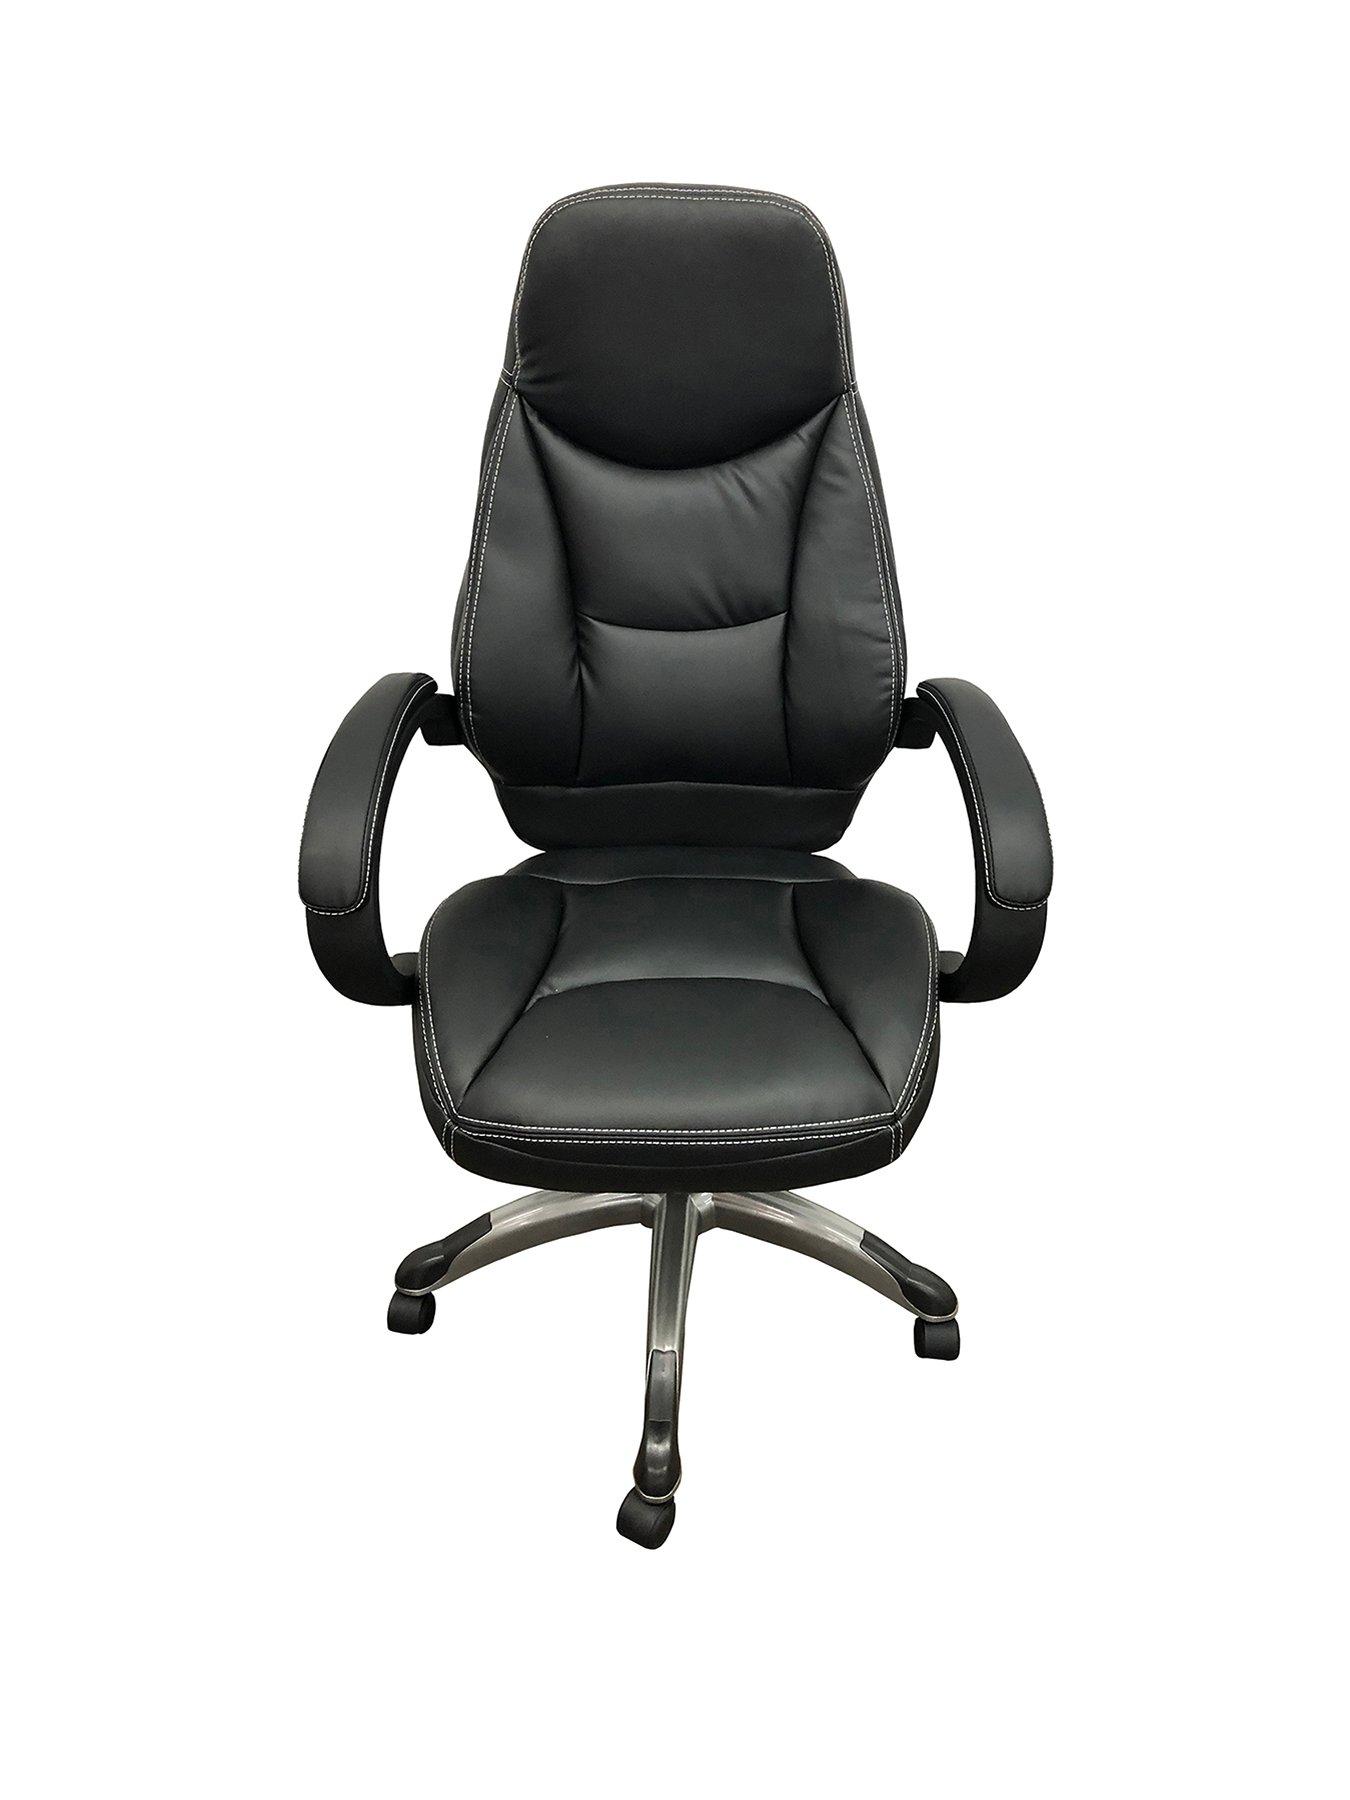 Grey Leather Office Chair Uk - magicaldreamwithjustin